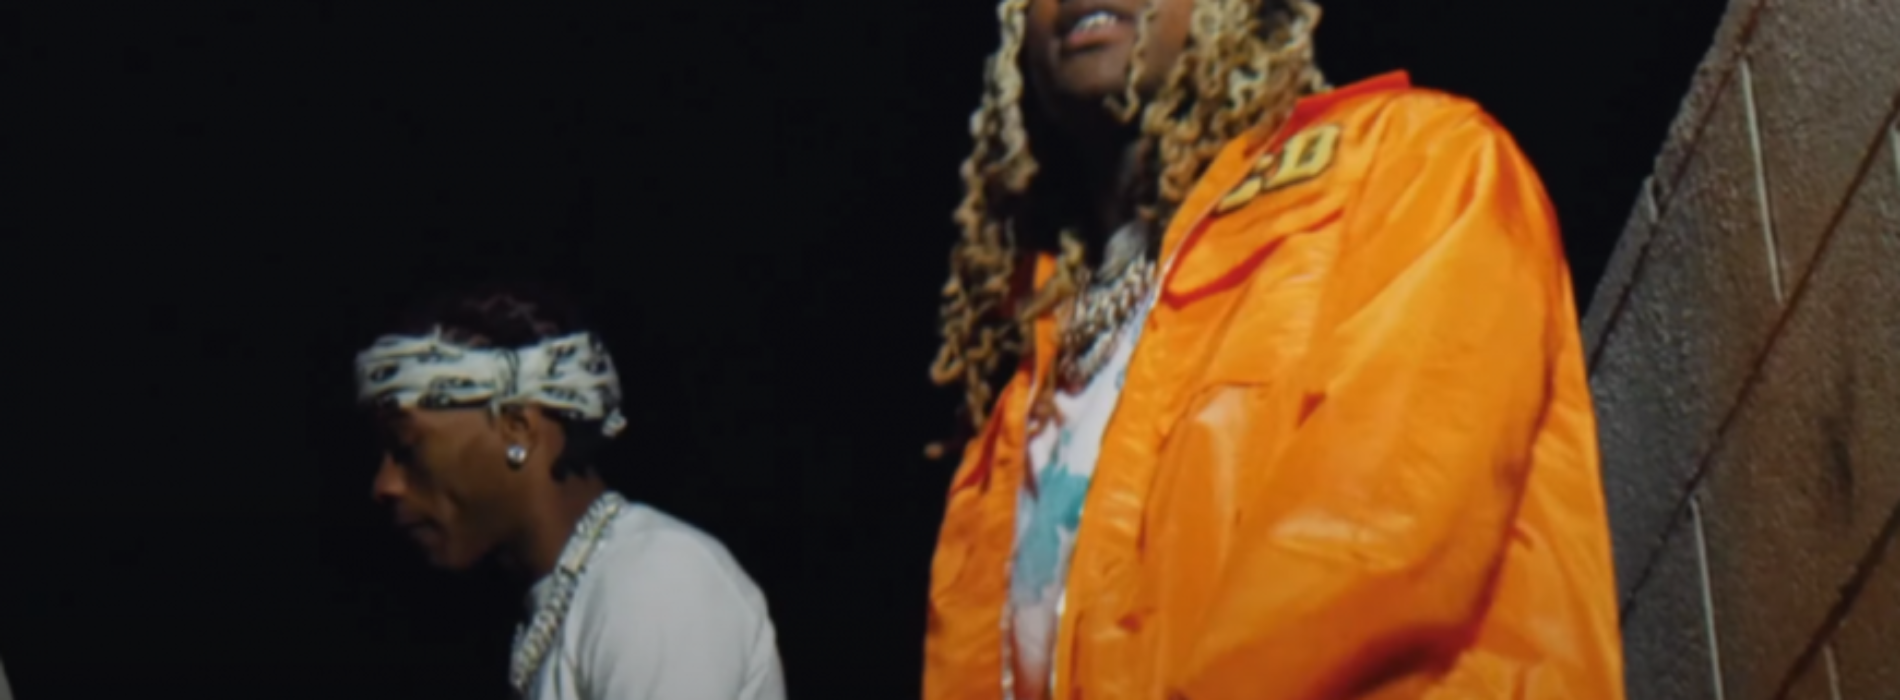 Lil Baby & Lil Durk – Man of my Word (Official Video) – Juillet 2021